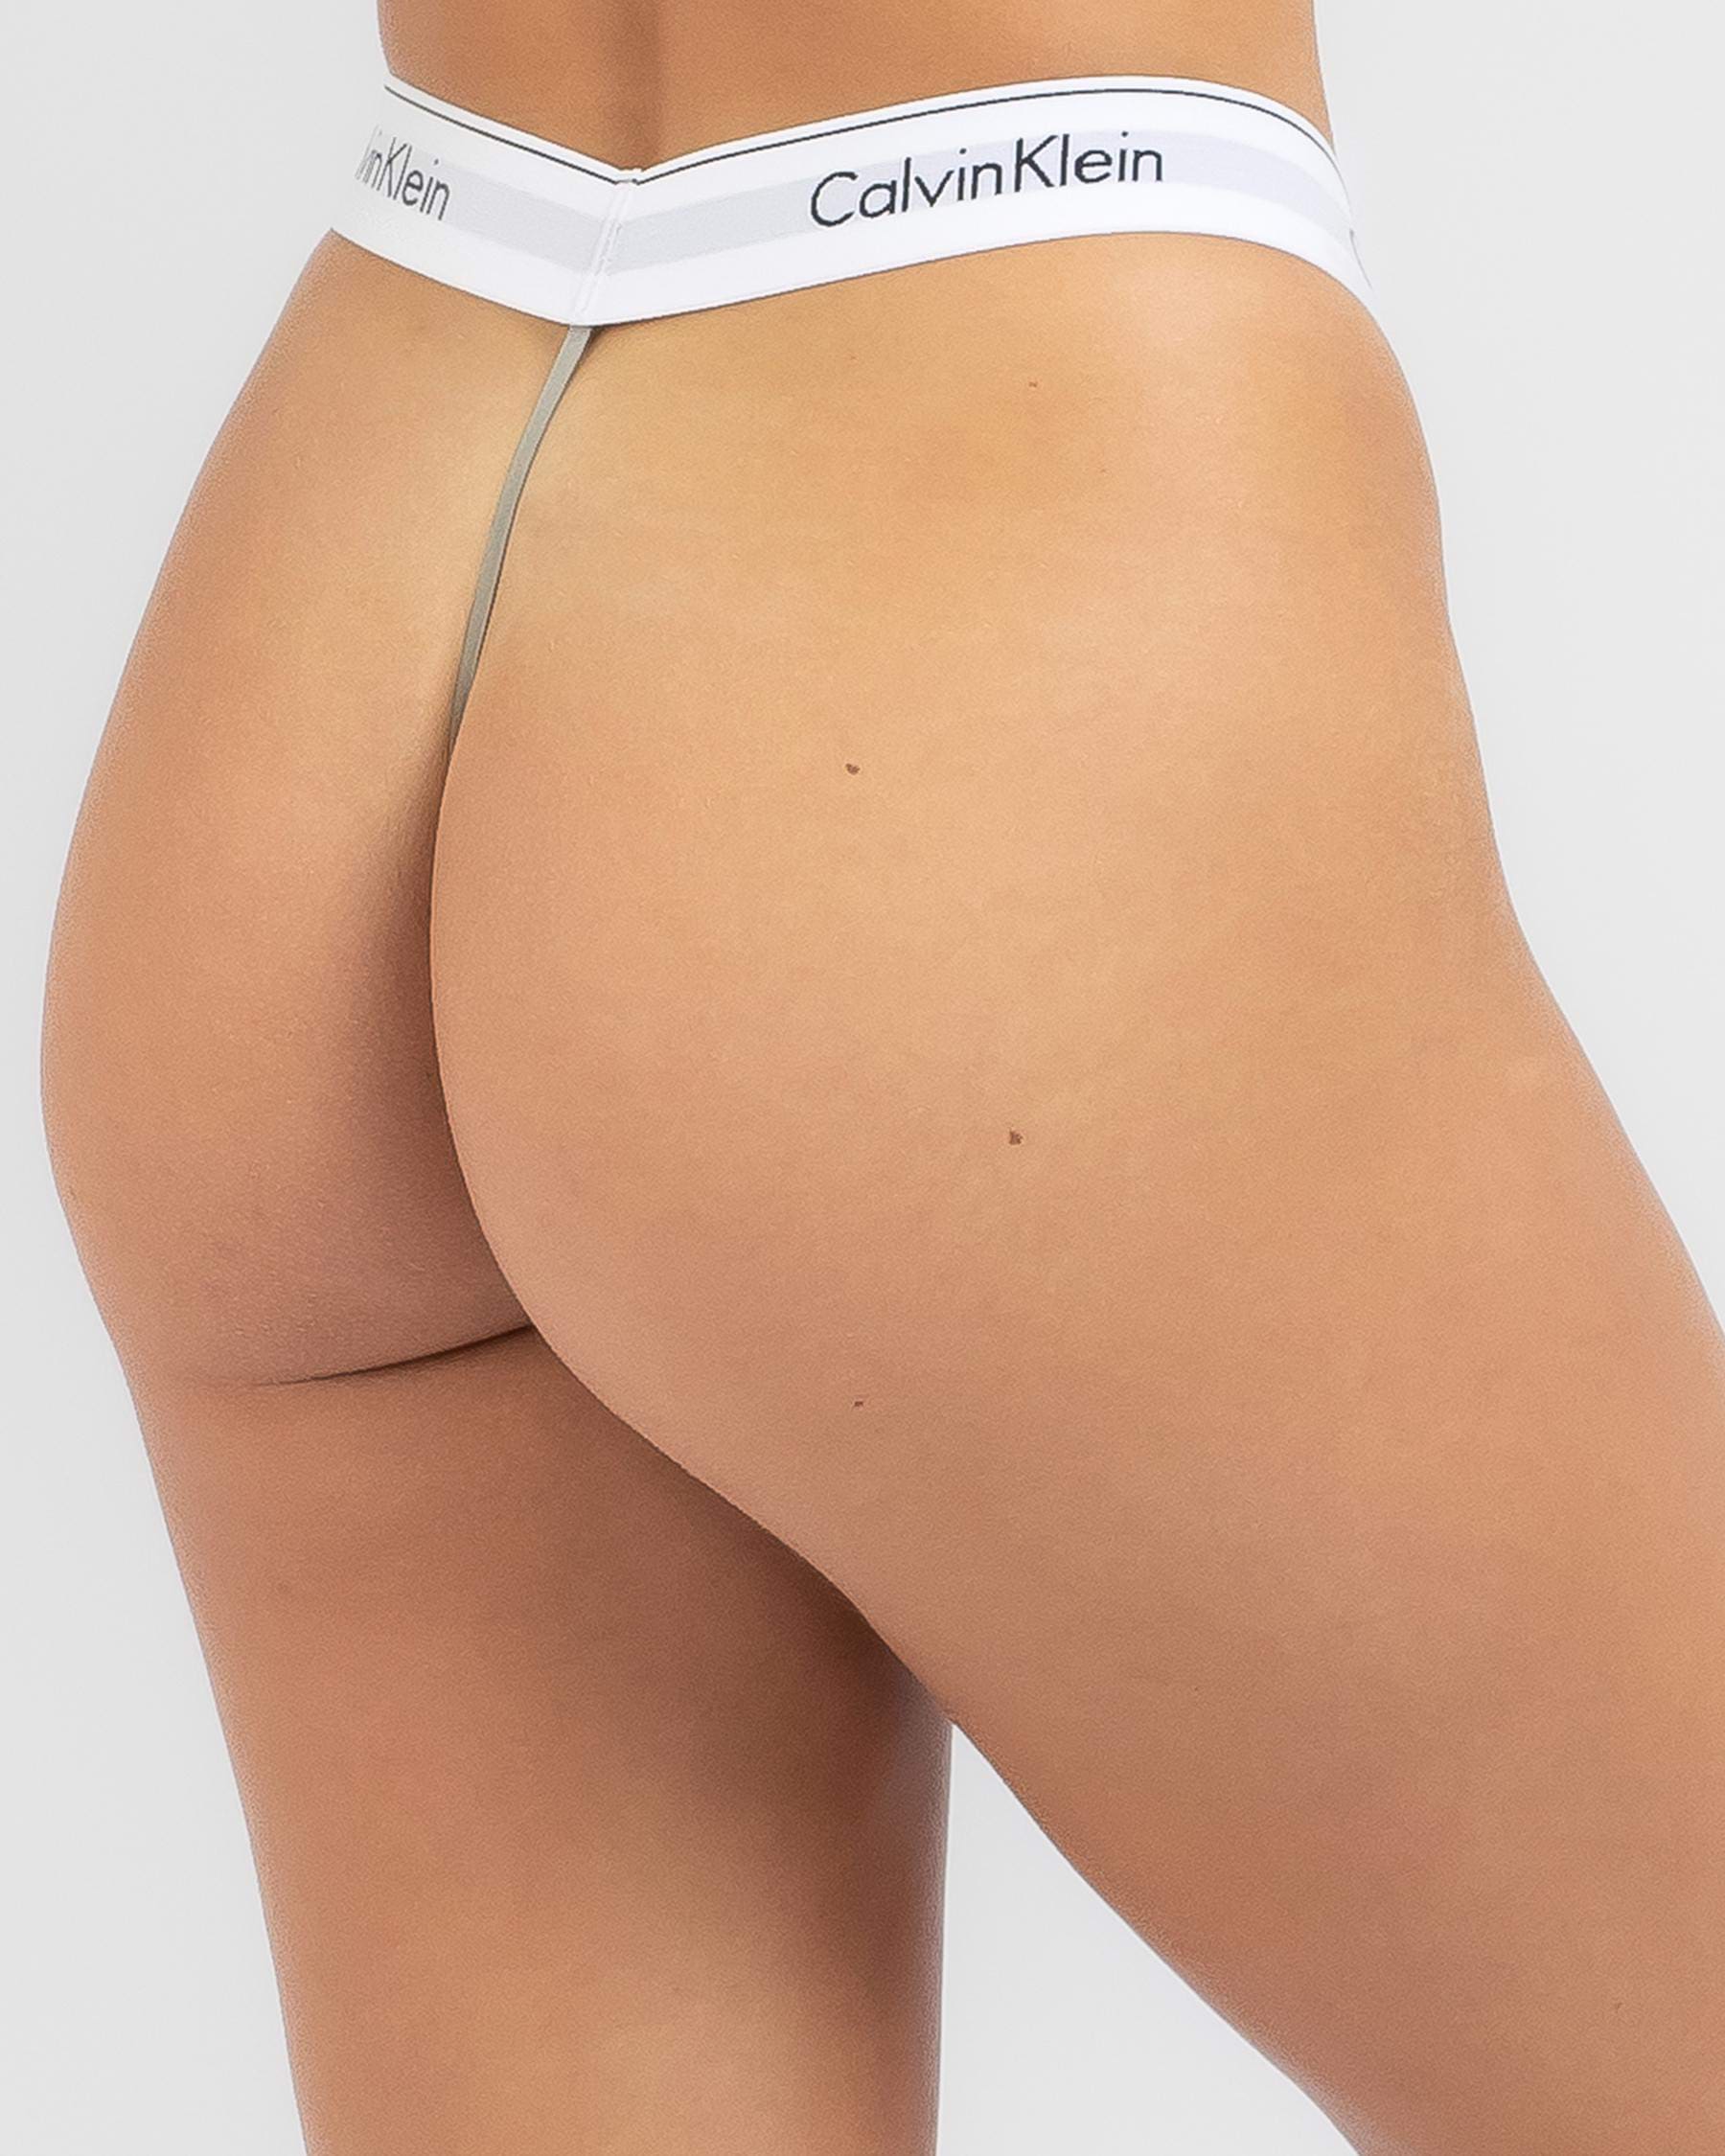 Calvin Returns Easy - States Beach In Grey City Klein Shipping - & String Cotton Modern FREE* Thong United Heather